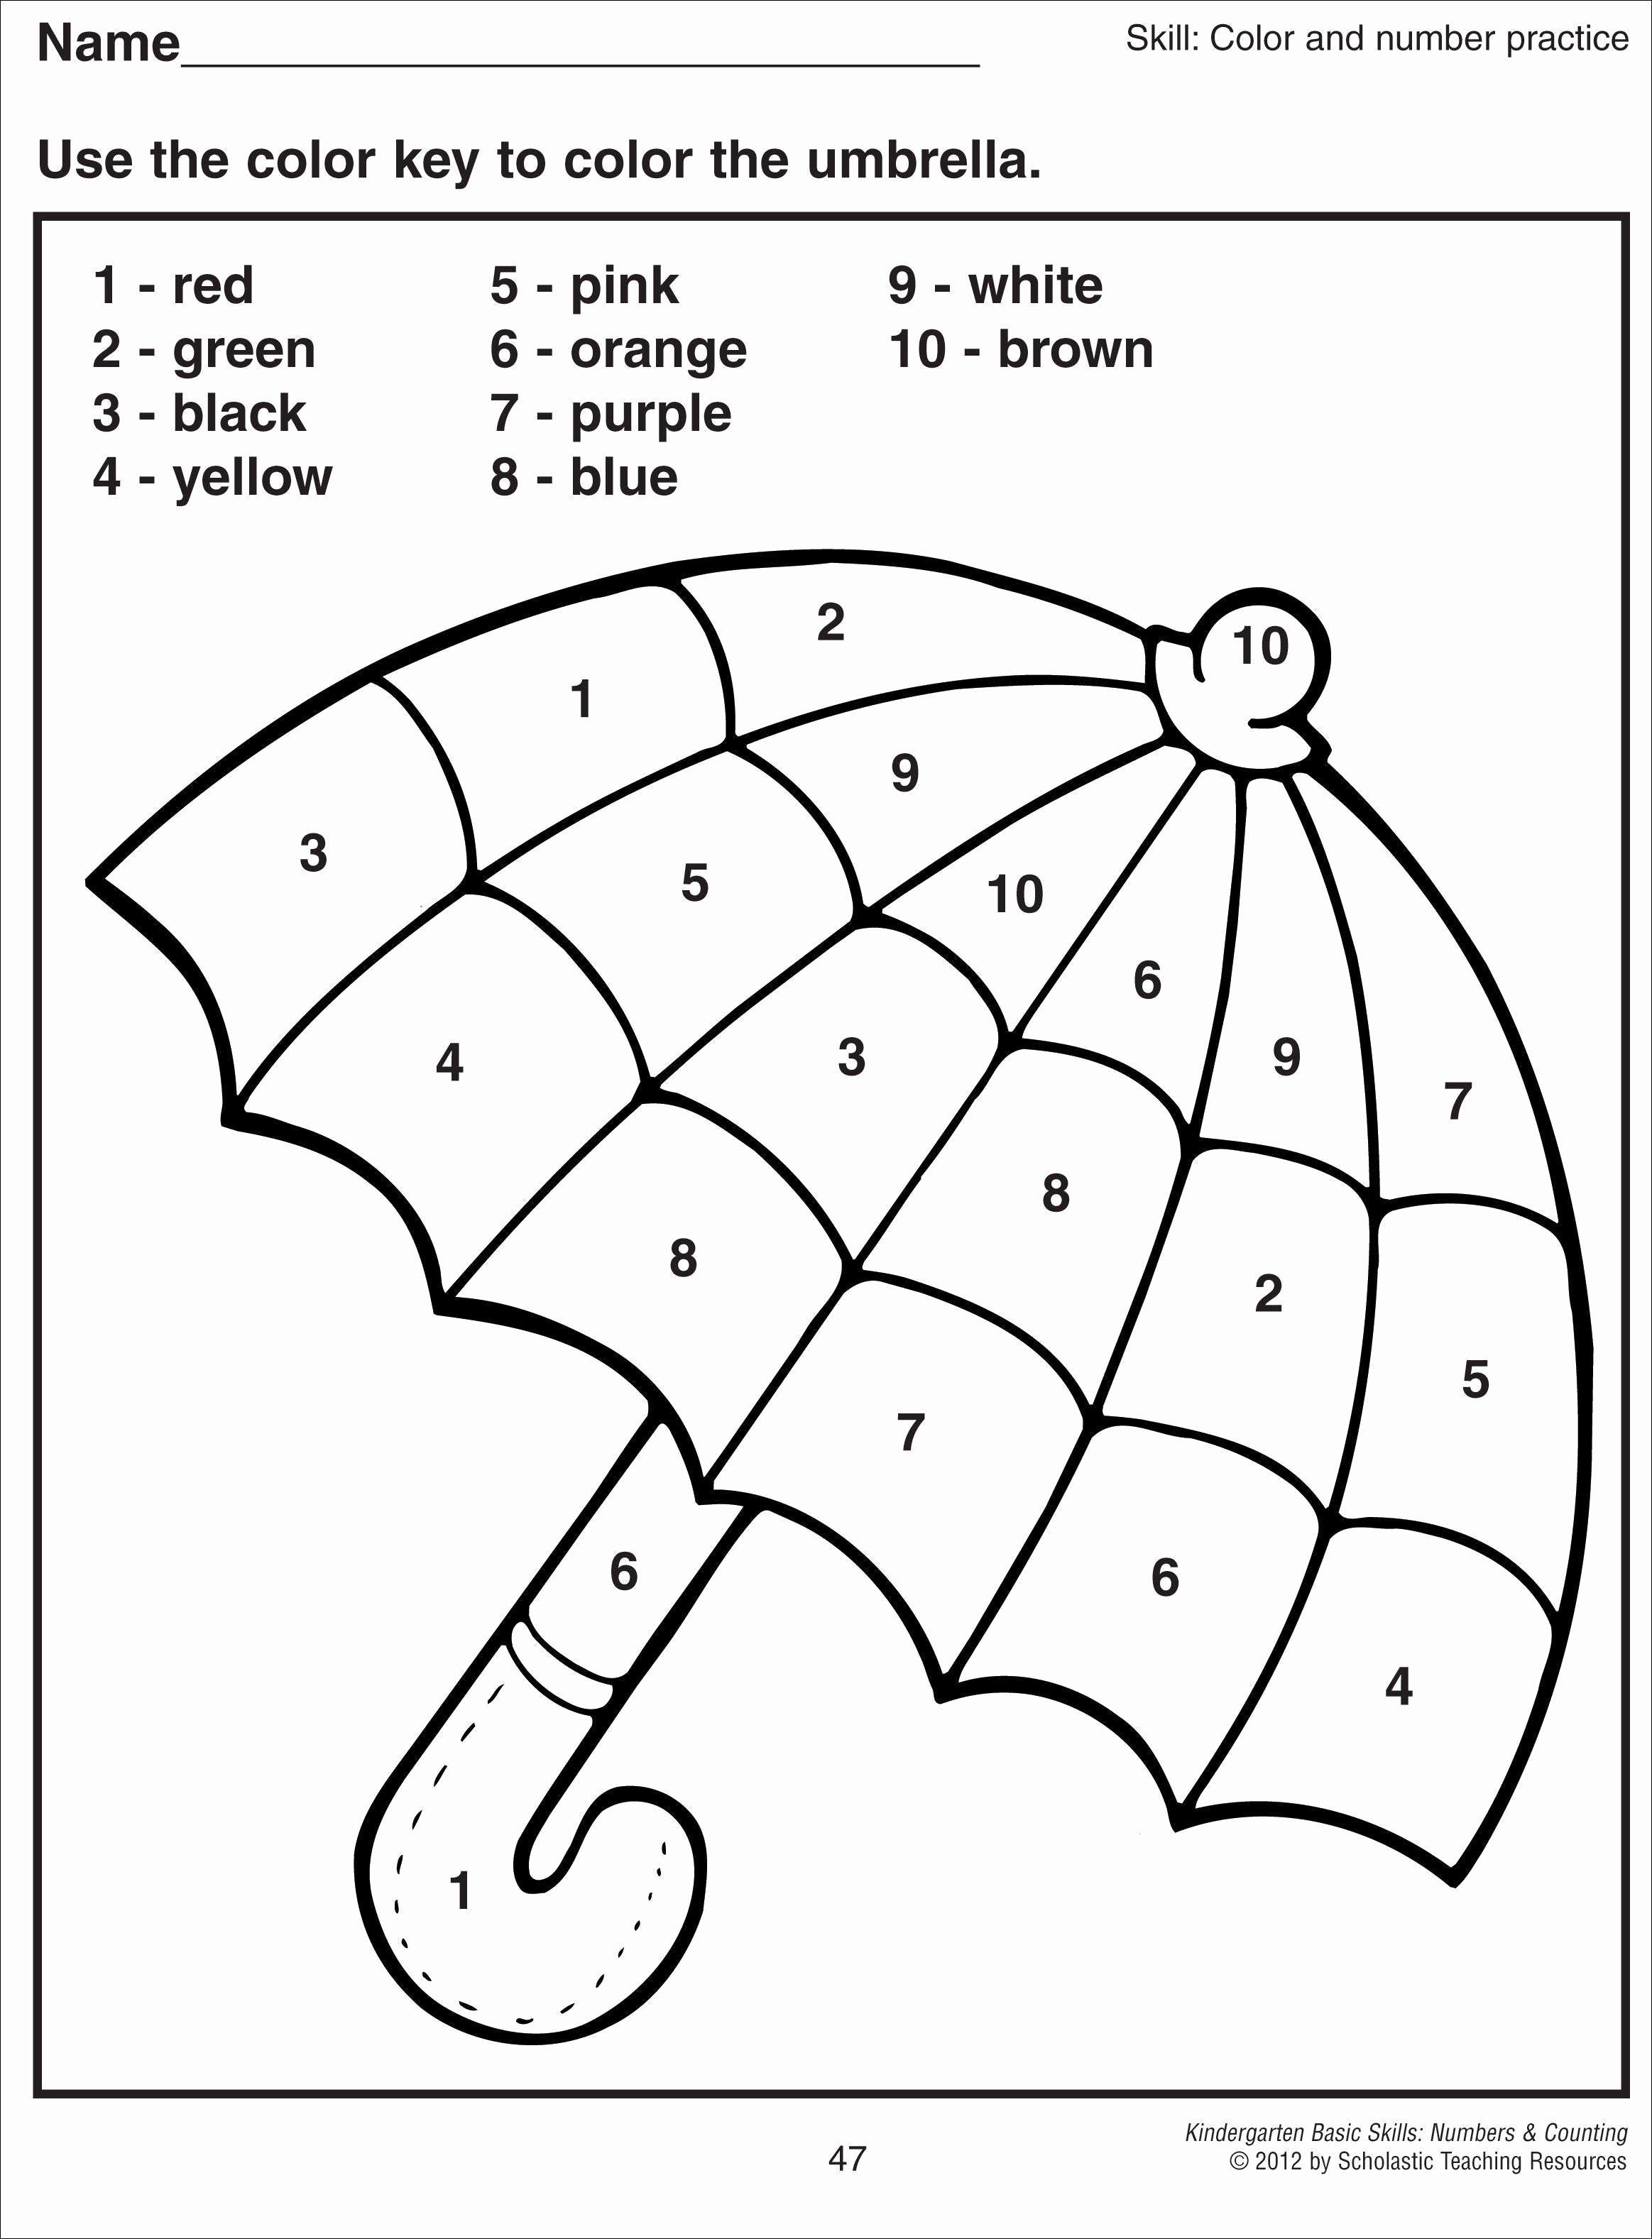 Coloring with Numbers Pdf Best Of New Coloring Worksheets for